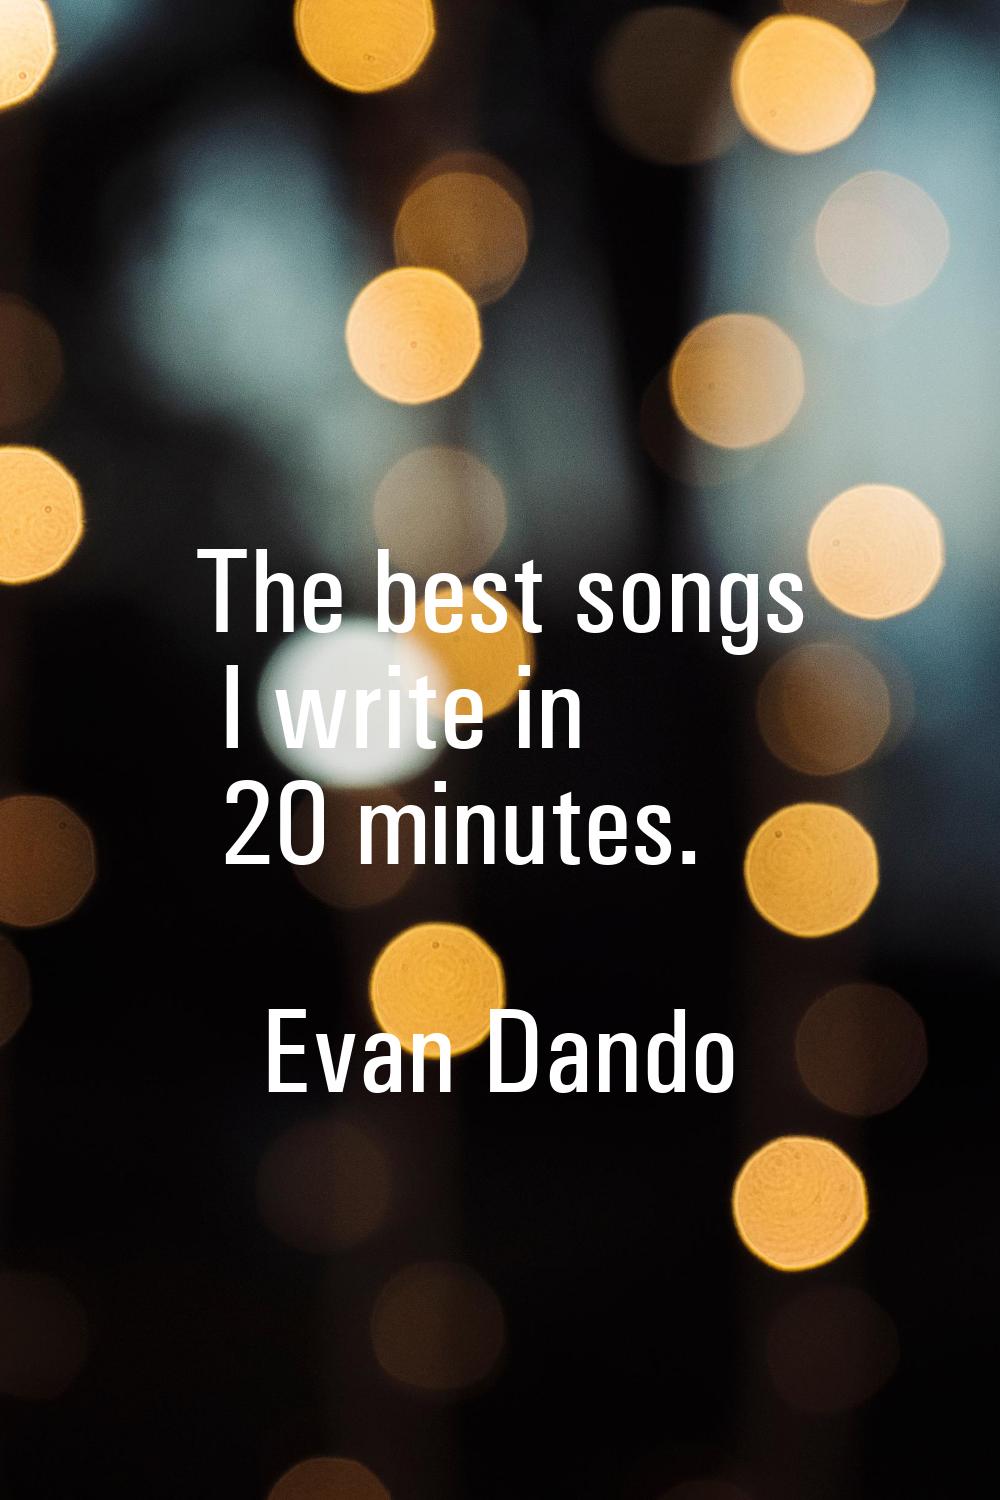 The best songs I write in 20 minutes.